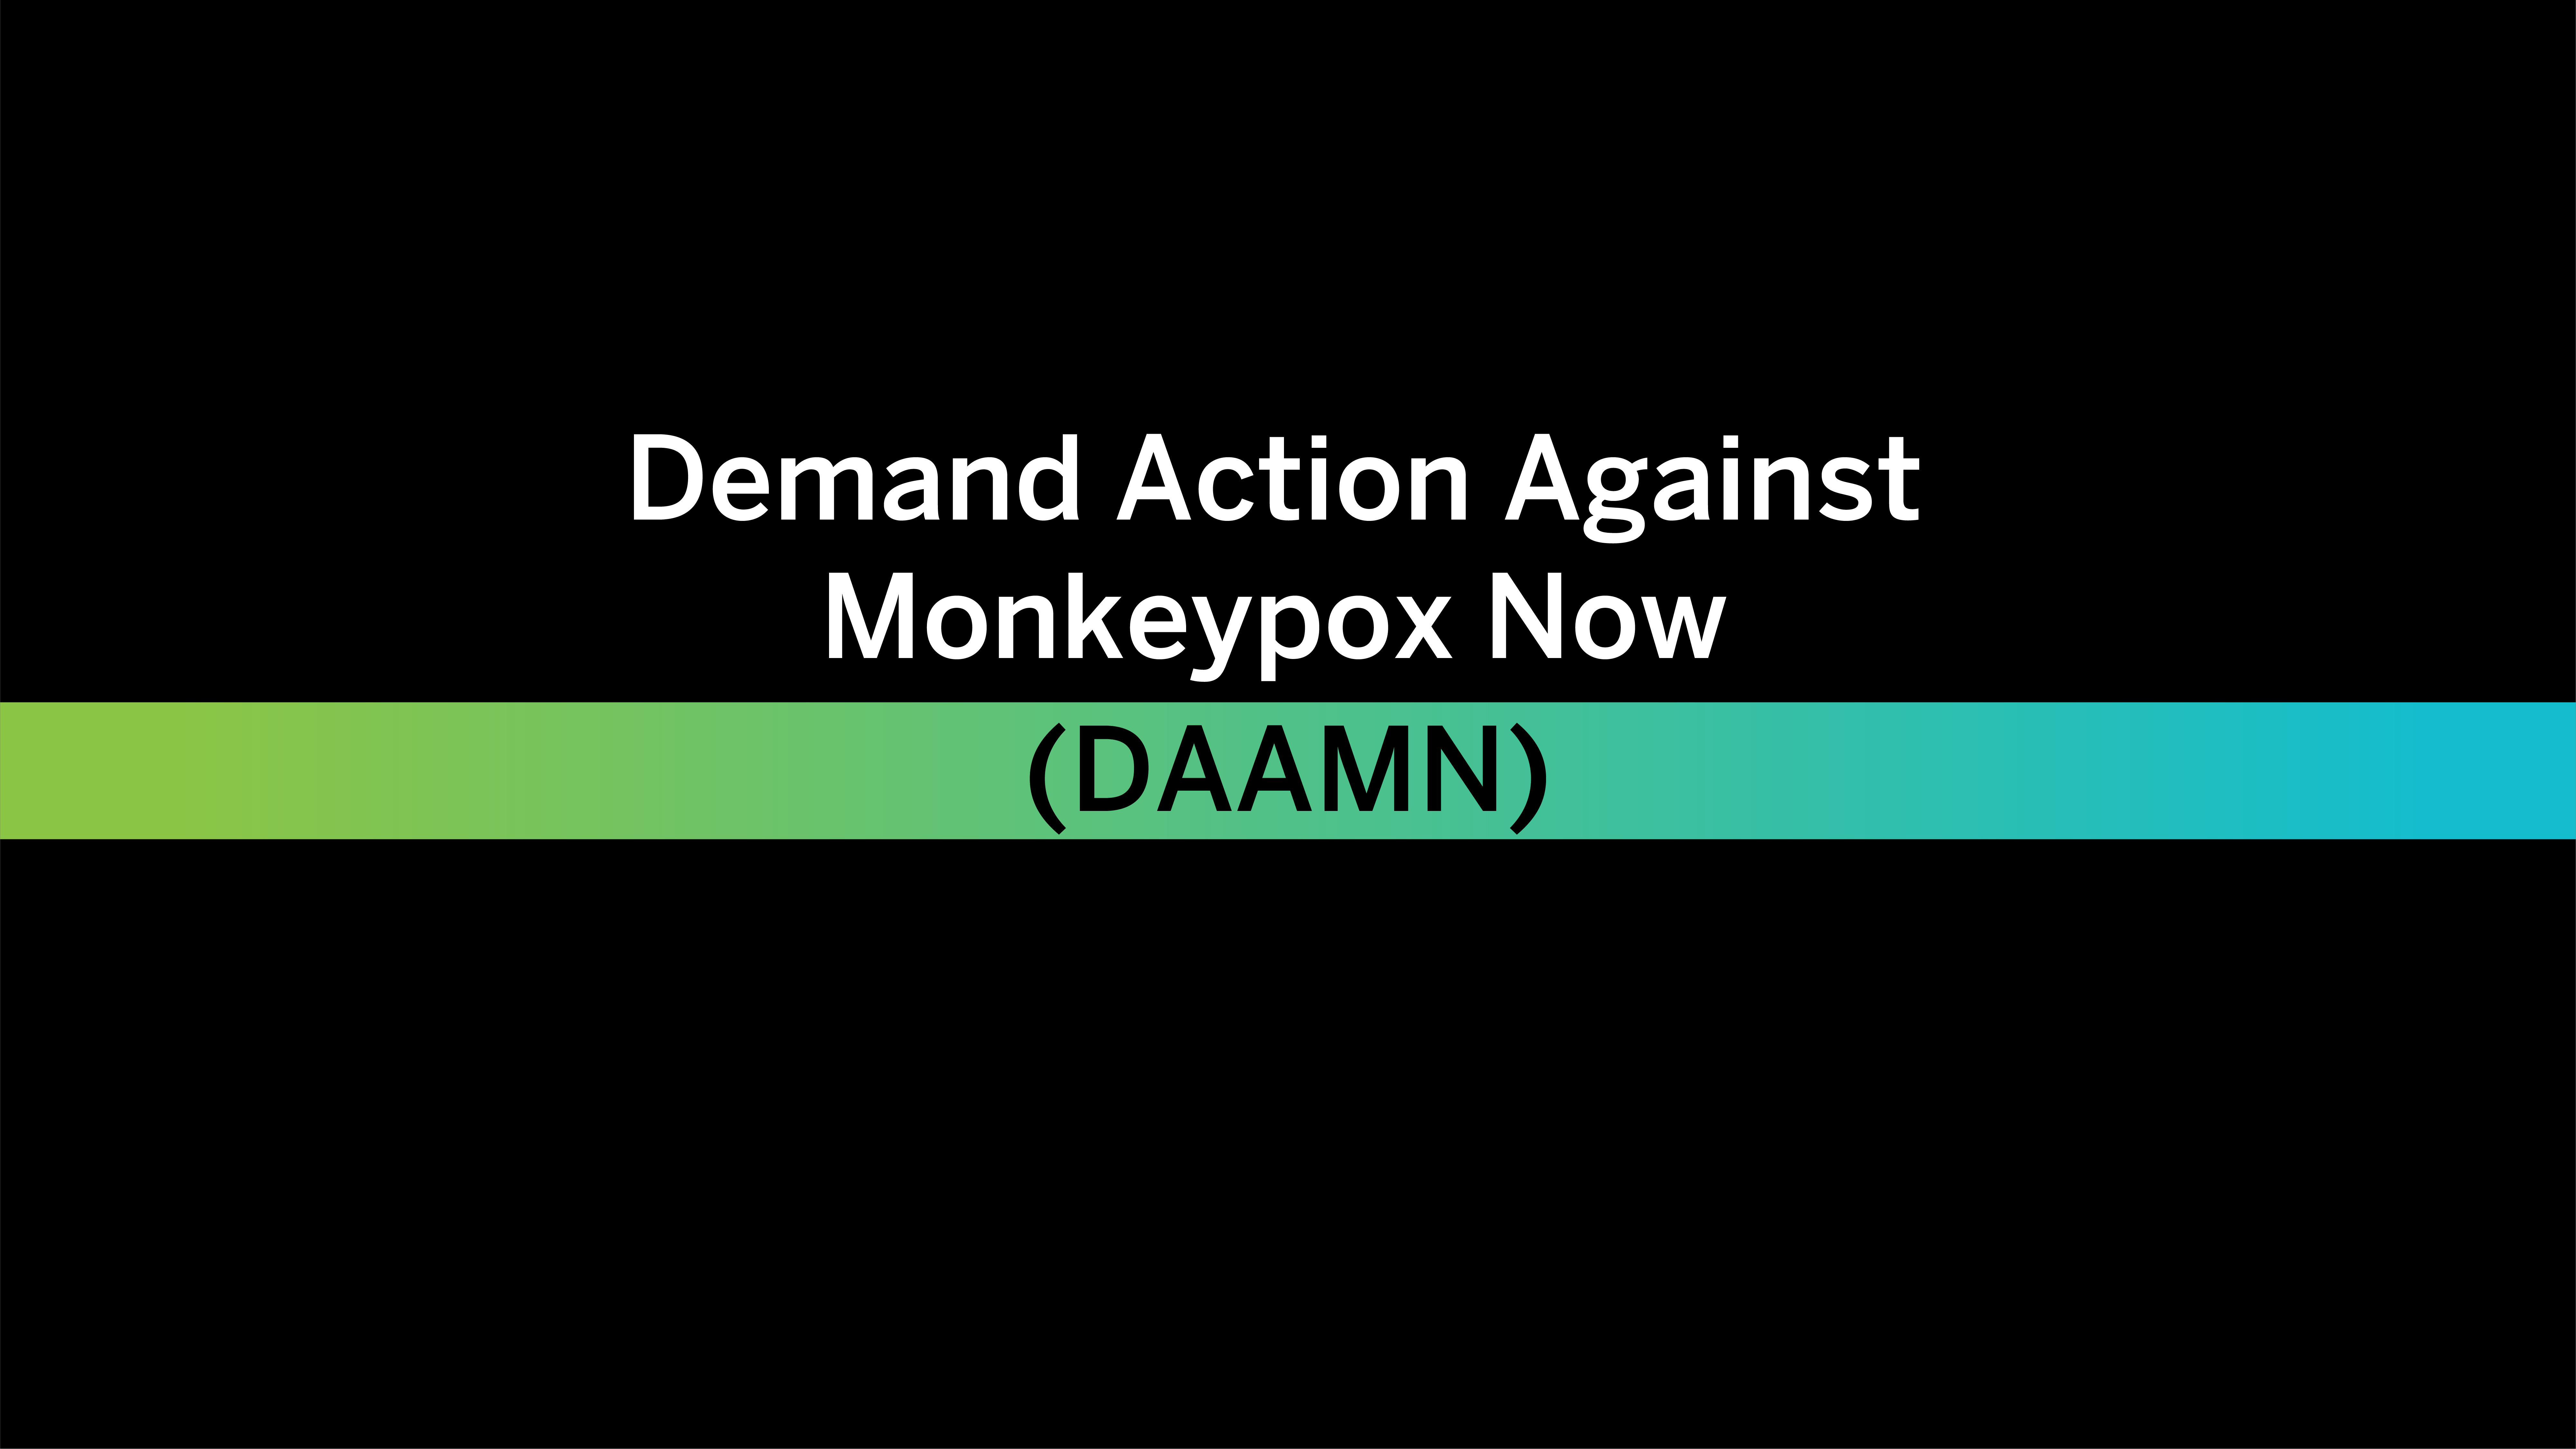 Town Hall to Demand Action Against Monkeypox Now!